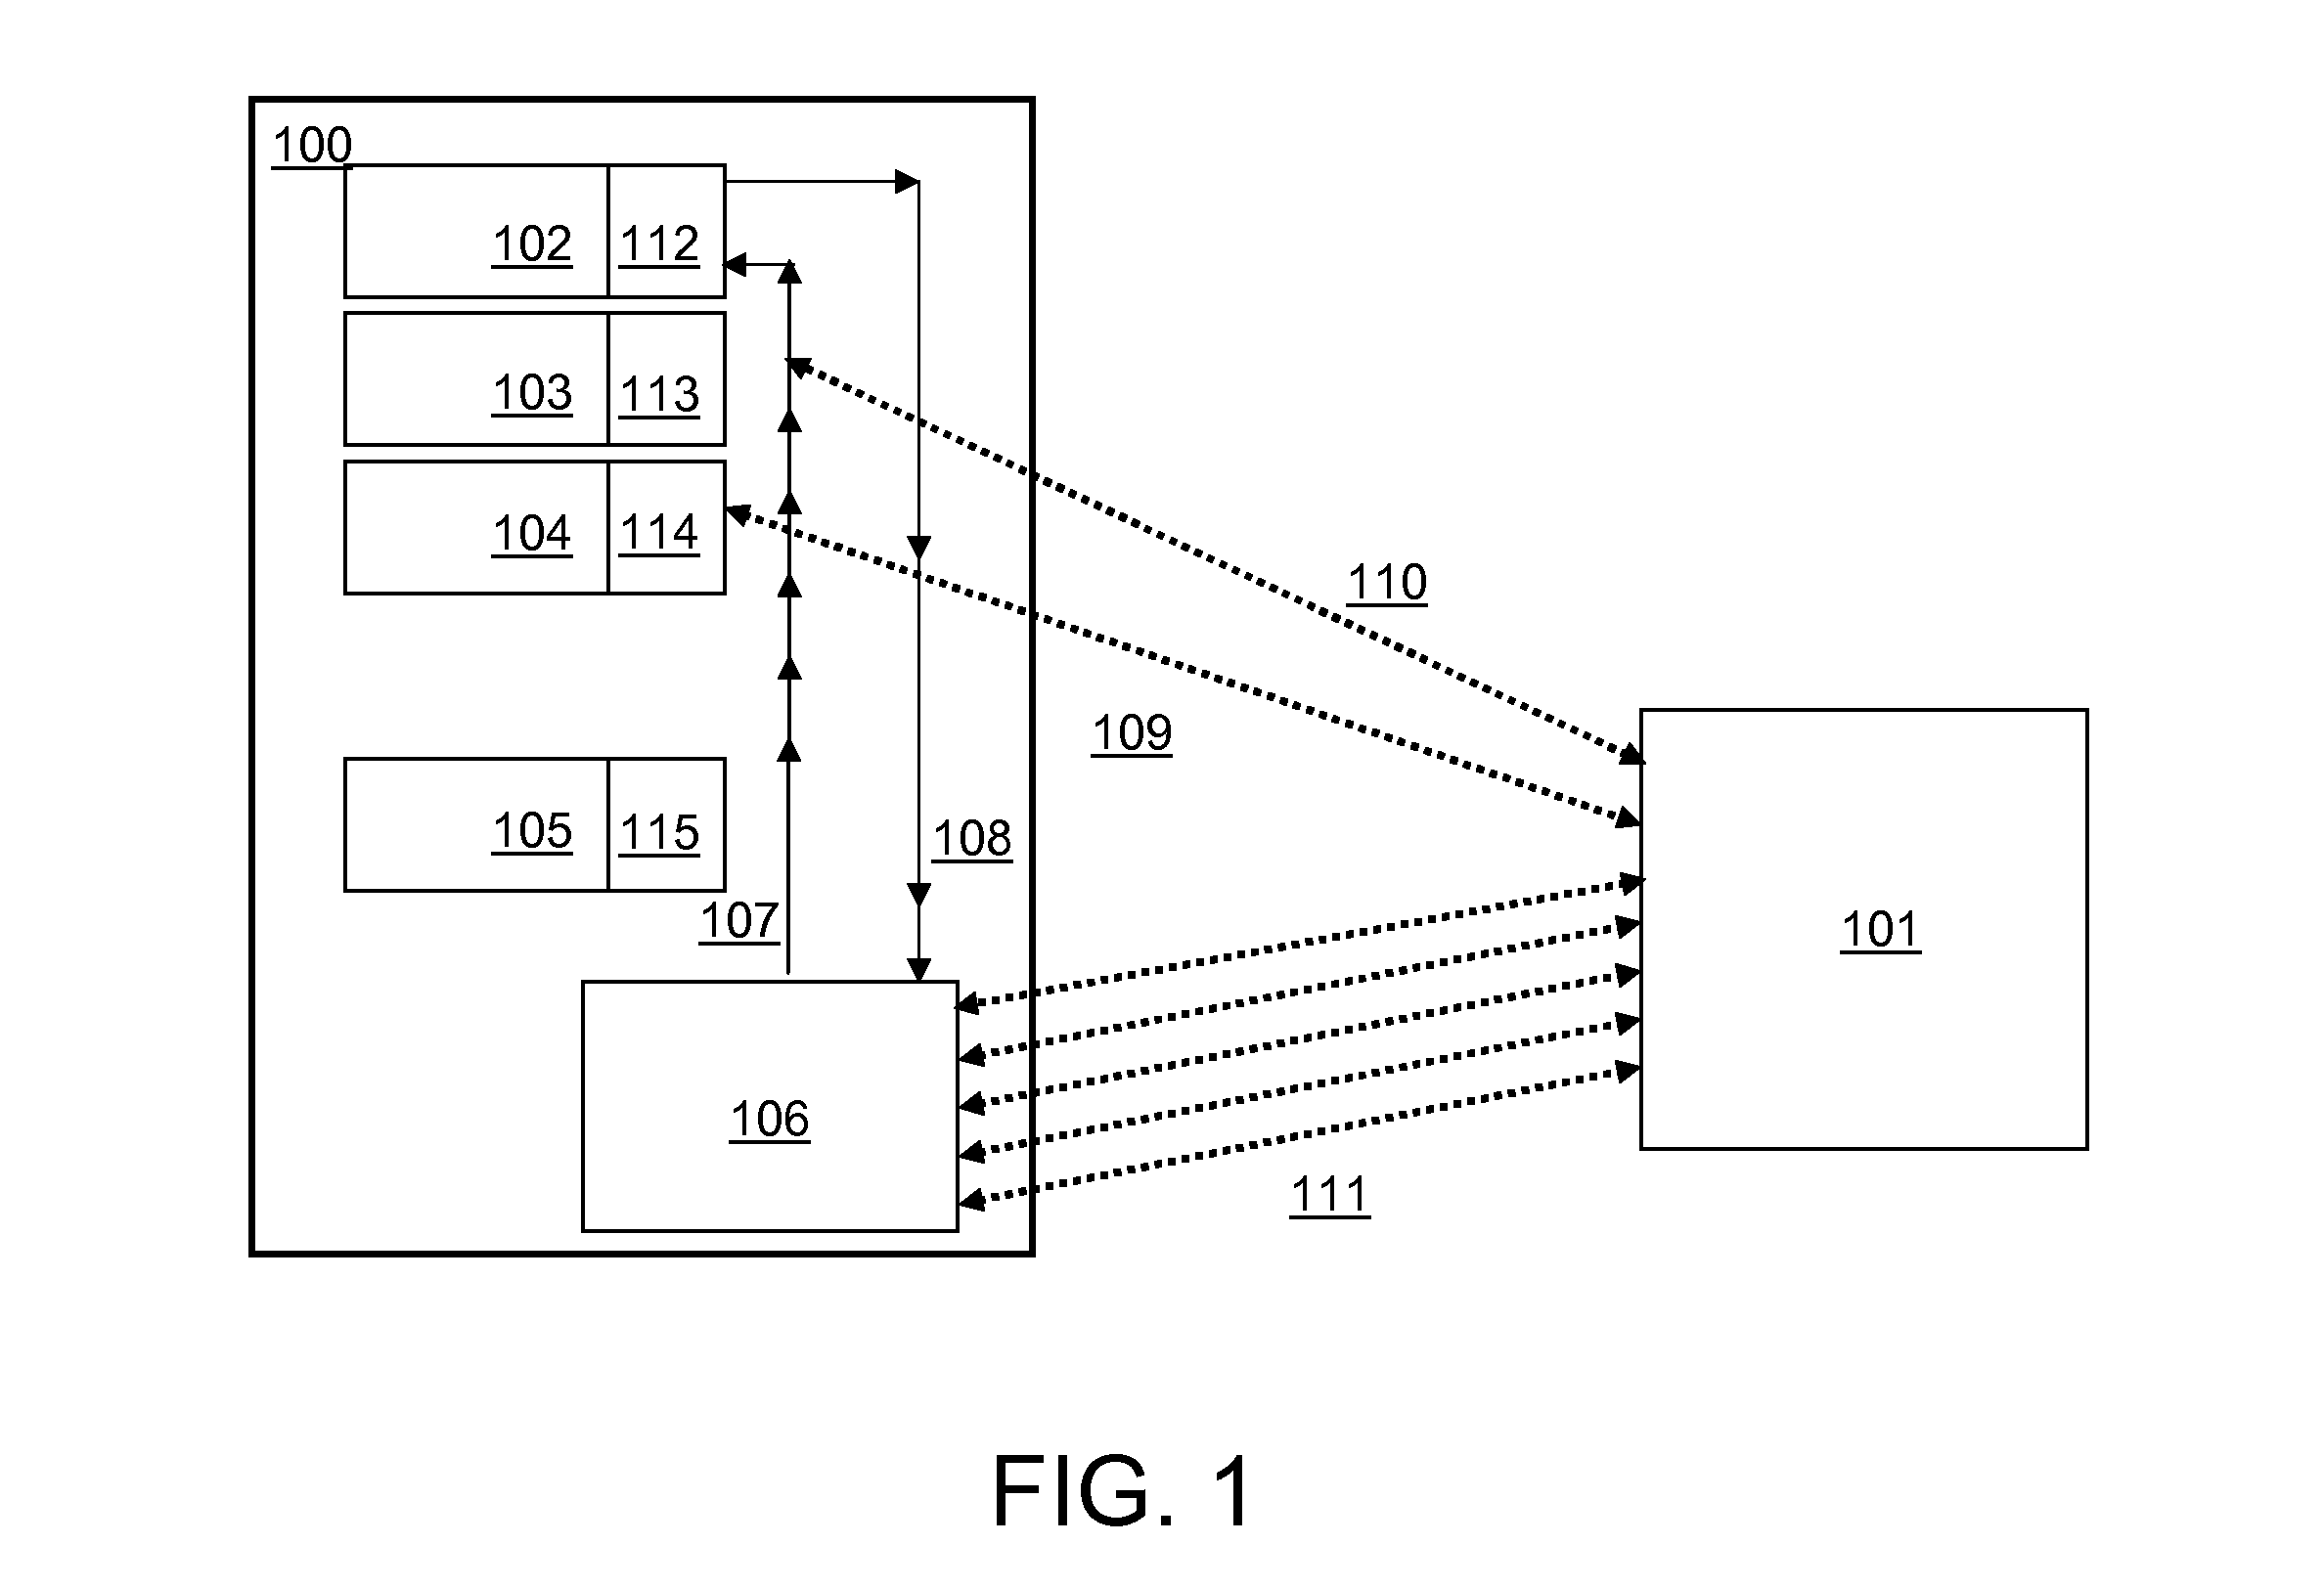 Method for Providing Connections for Application Processes to a Database Server